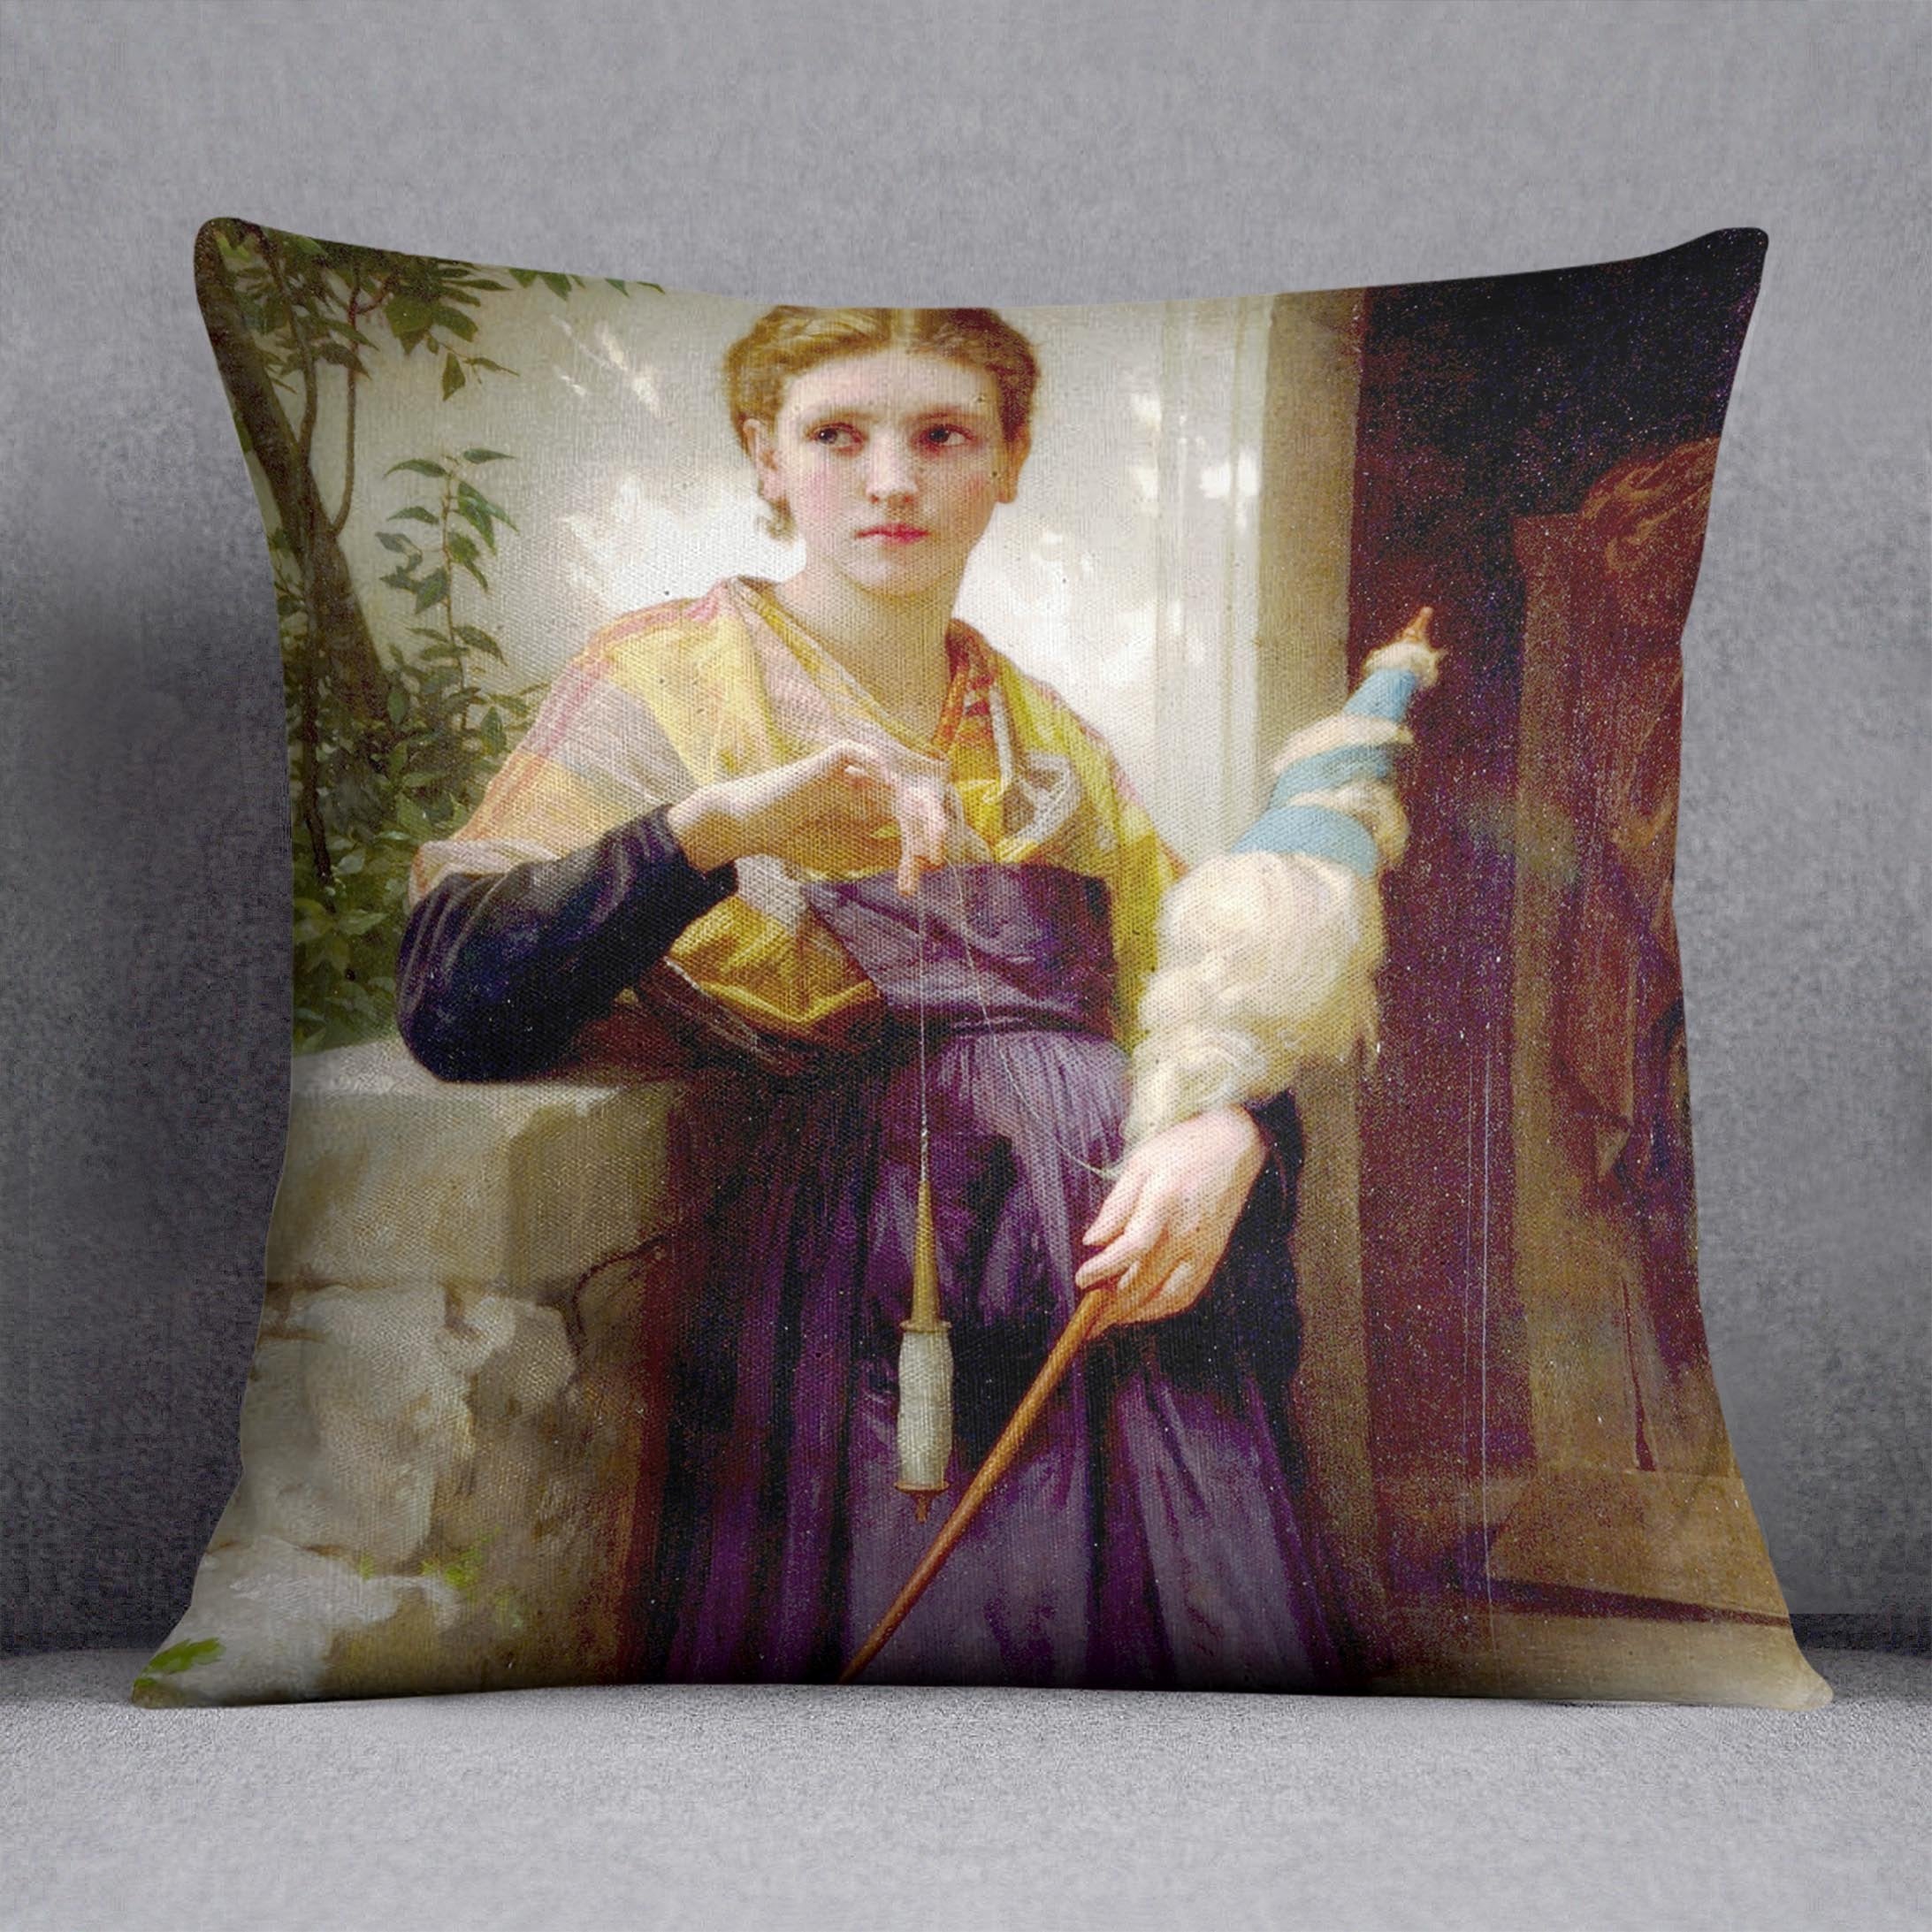 The Spinne By Bouguereau Throw Pillow